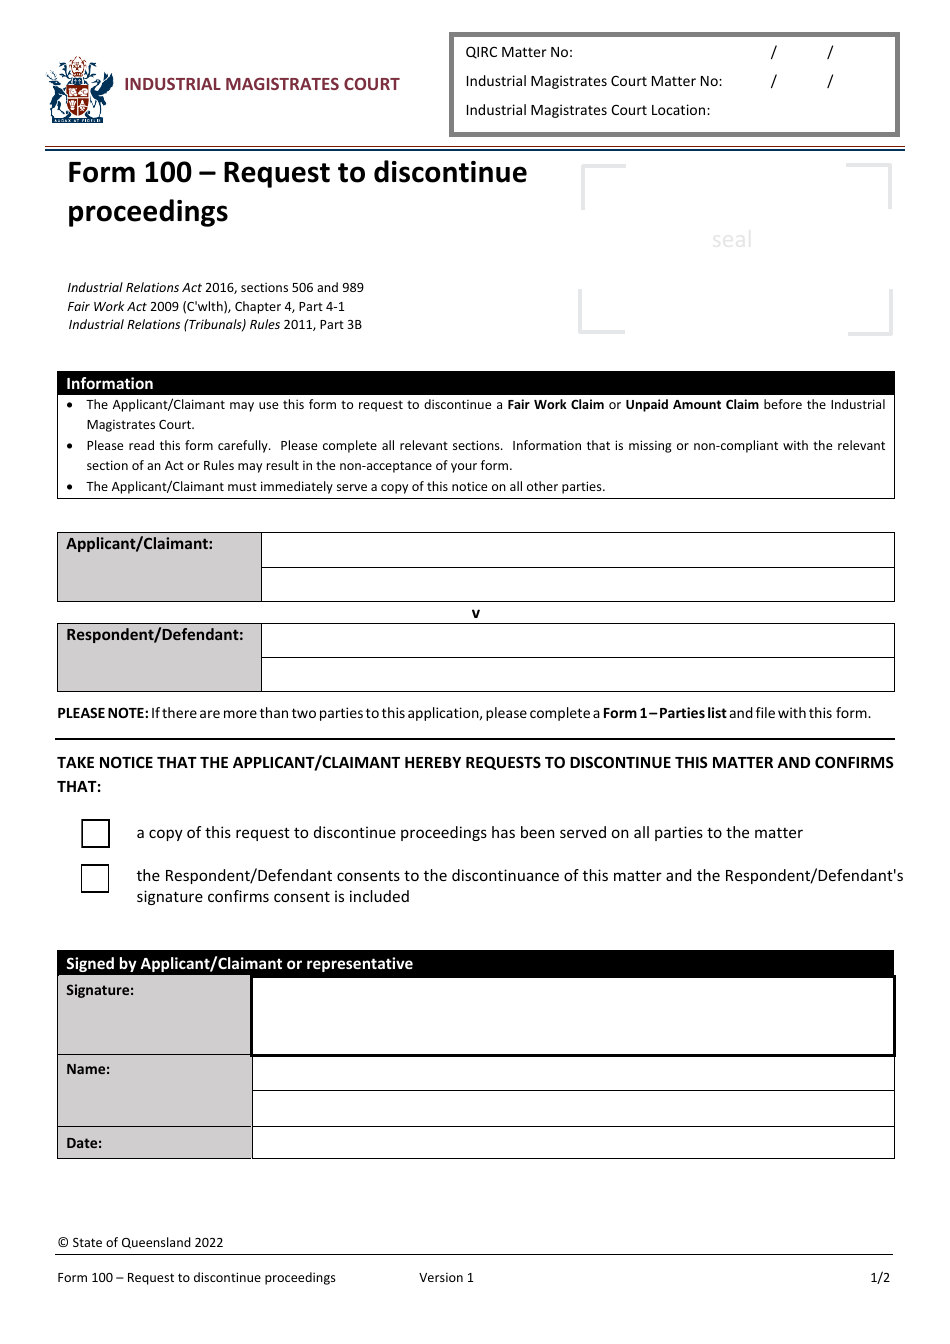 Form 100 Request to Discontinue Proceedings - Queensland, Australia, Page 1